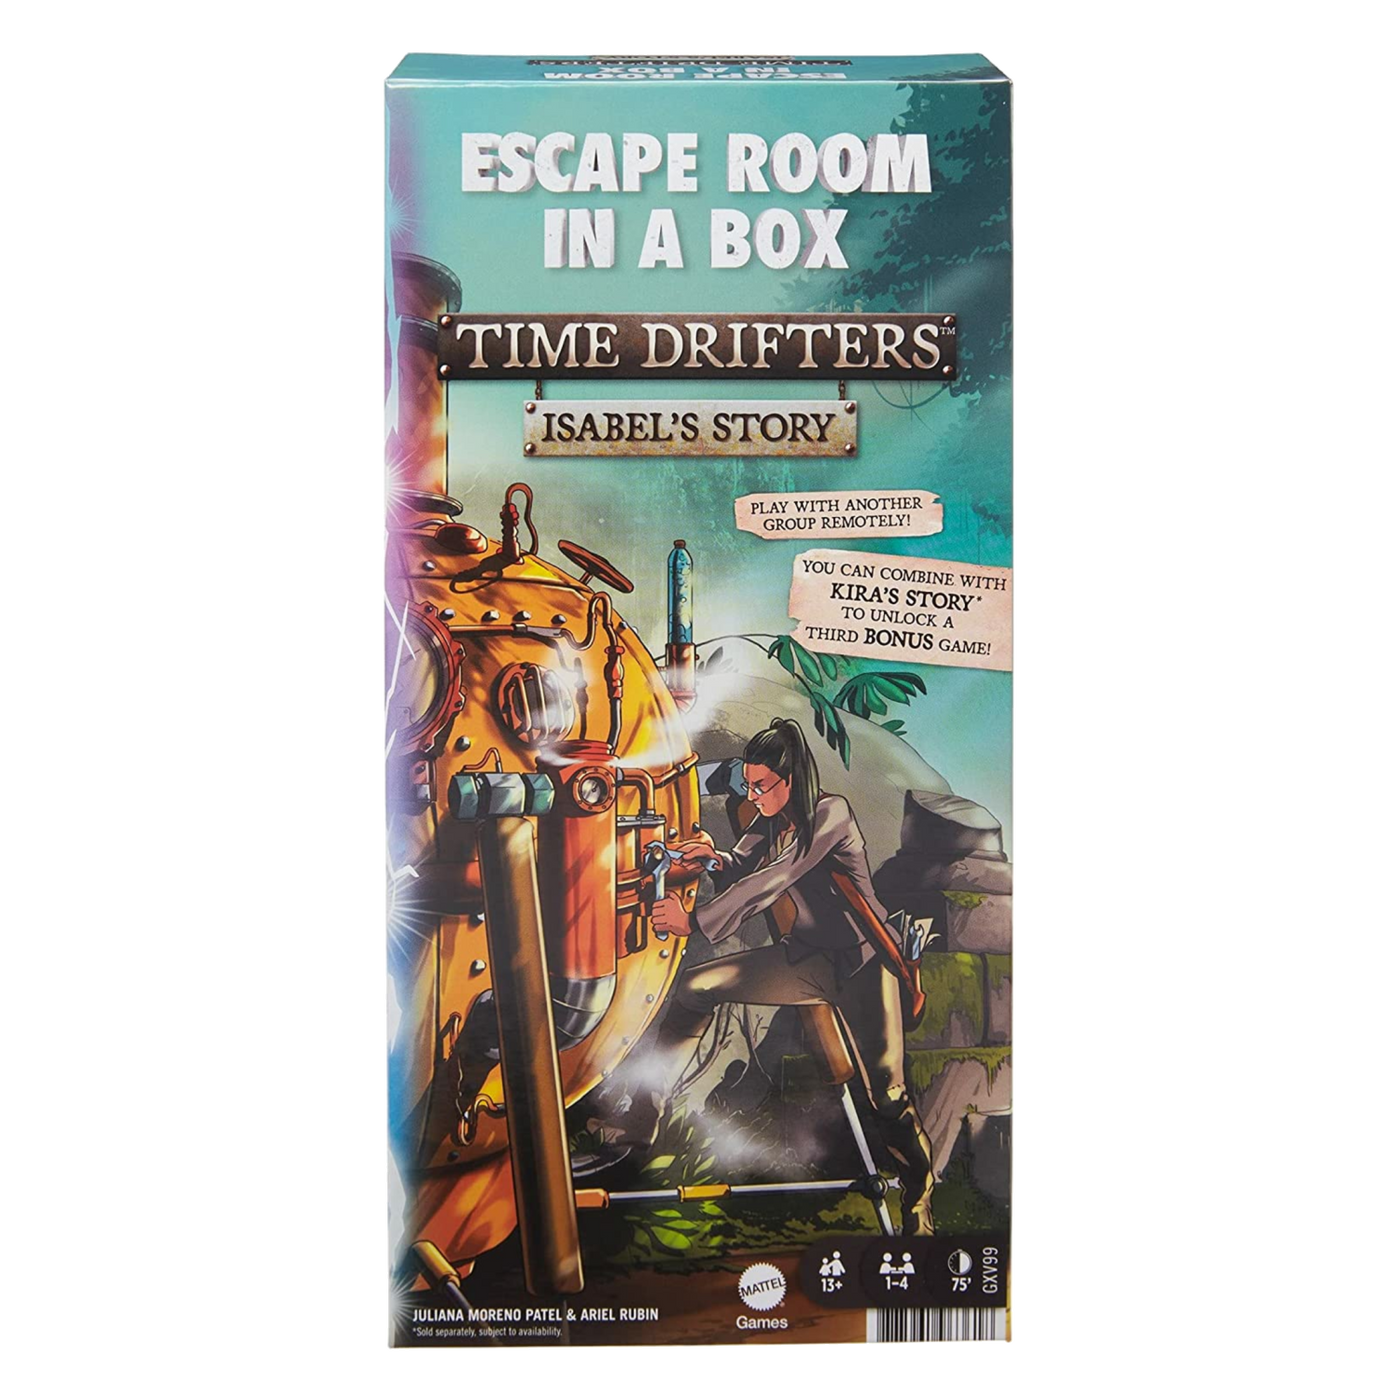 Escape Room in a Box: Time Drifters - Isabel's Story